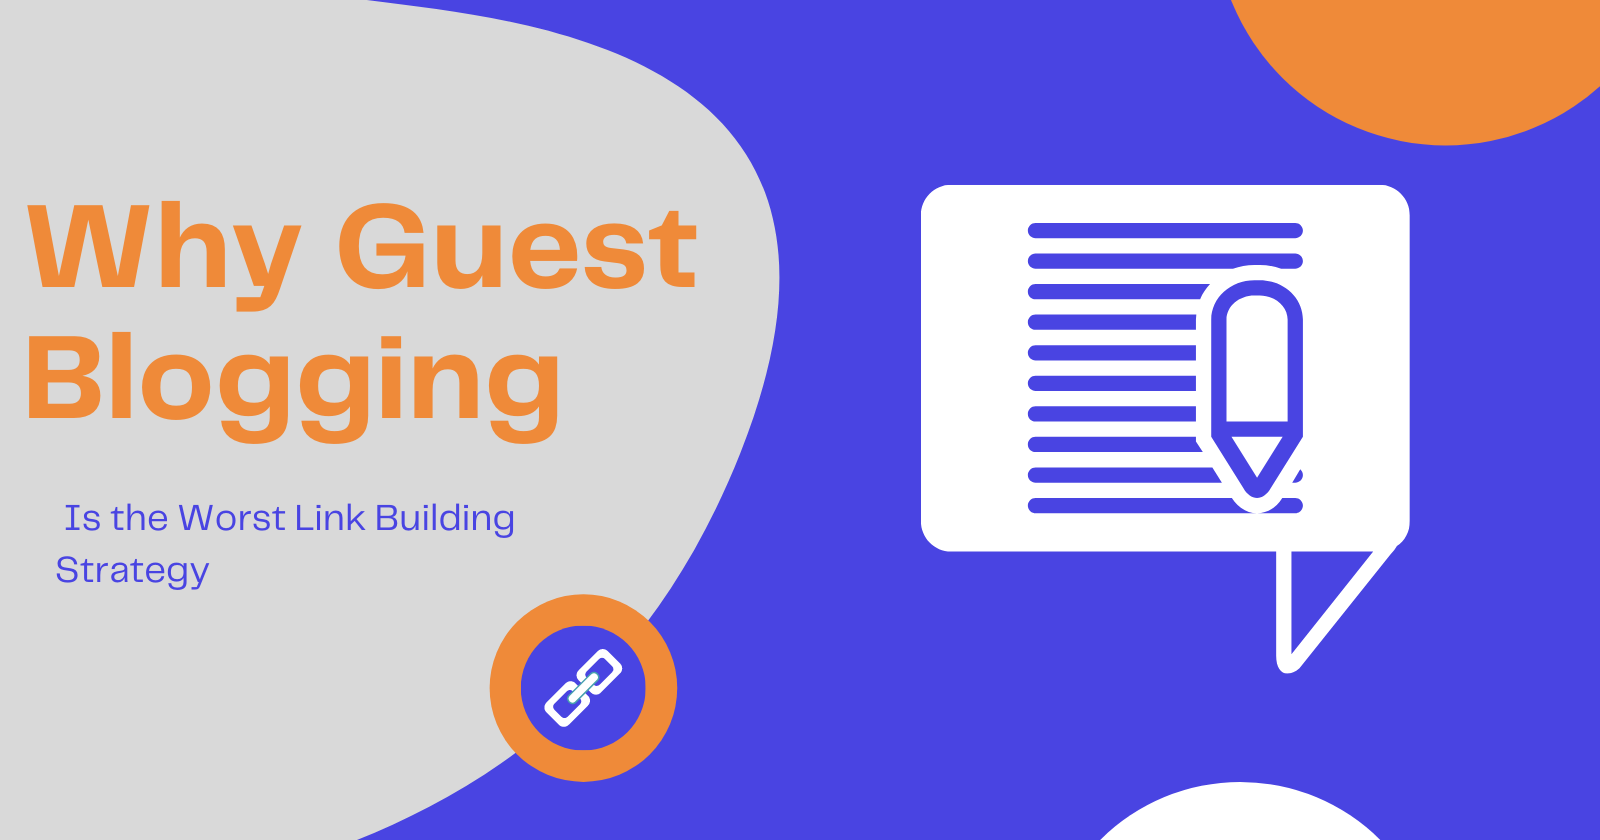 Why Guest Blogging is the Worst for Link Building